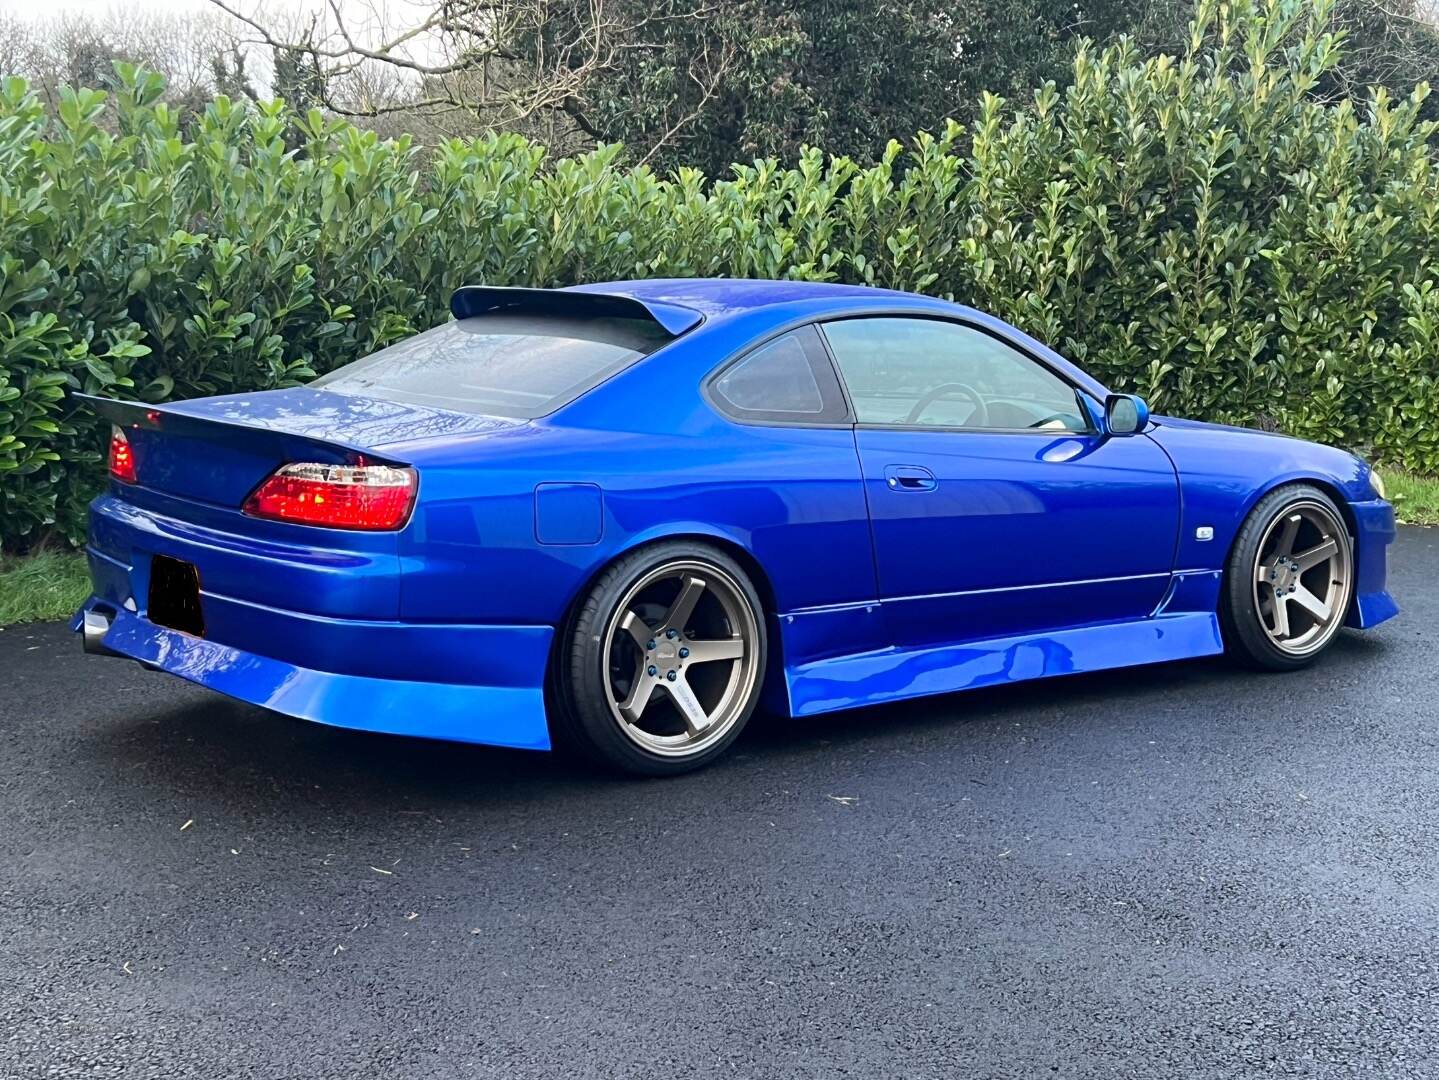 Nissan Silvia S15 rb25 in Down